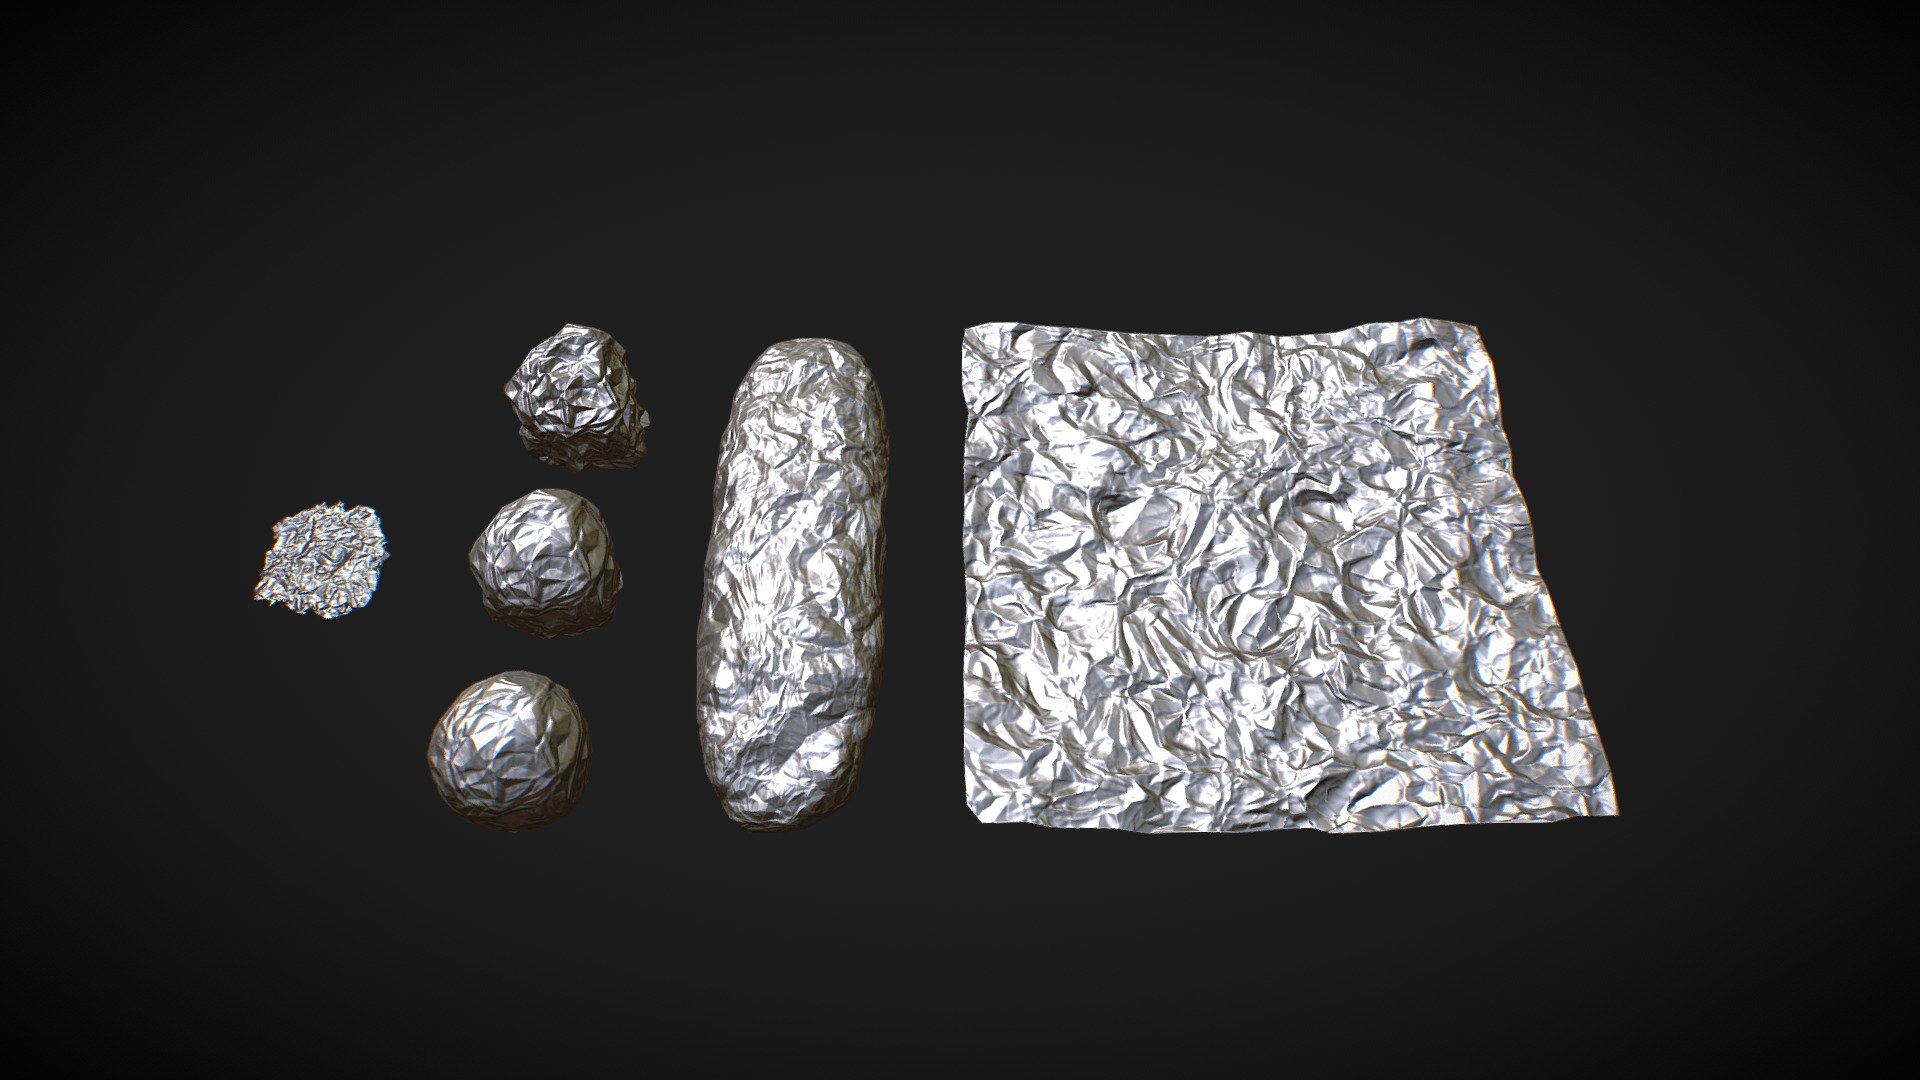 Basic set of wrinkled foil like objects, including a sheet, balls and a smashed piece.

2048² Normal + Height &amp; AO

1024² Normal + Height, AO, Alpha (smashed piece)

LOD0: ~600

LOD1: ~100
 - Foil Objects - Buy Royalty Free 3D model by Gargore 3d model